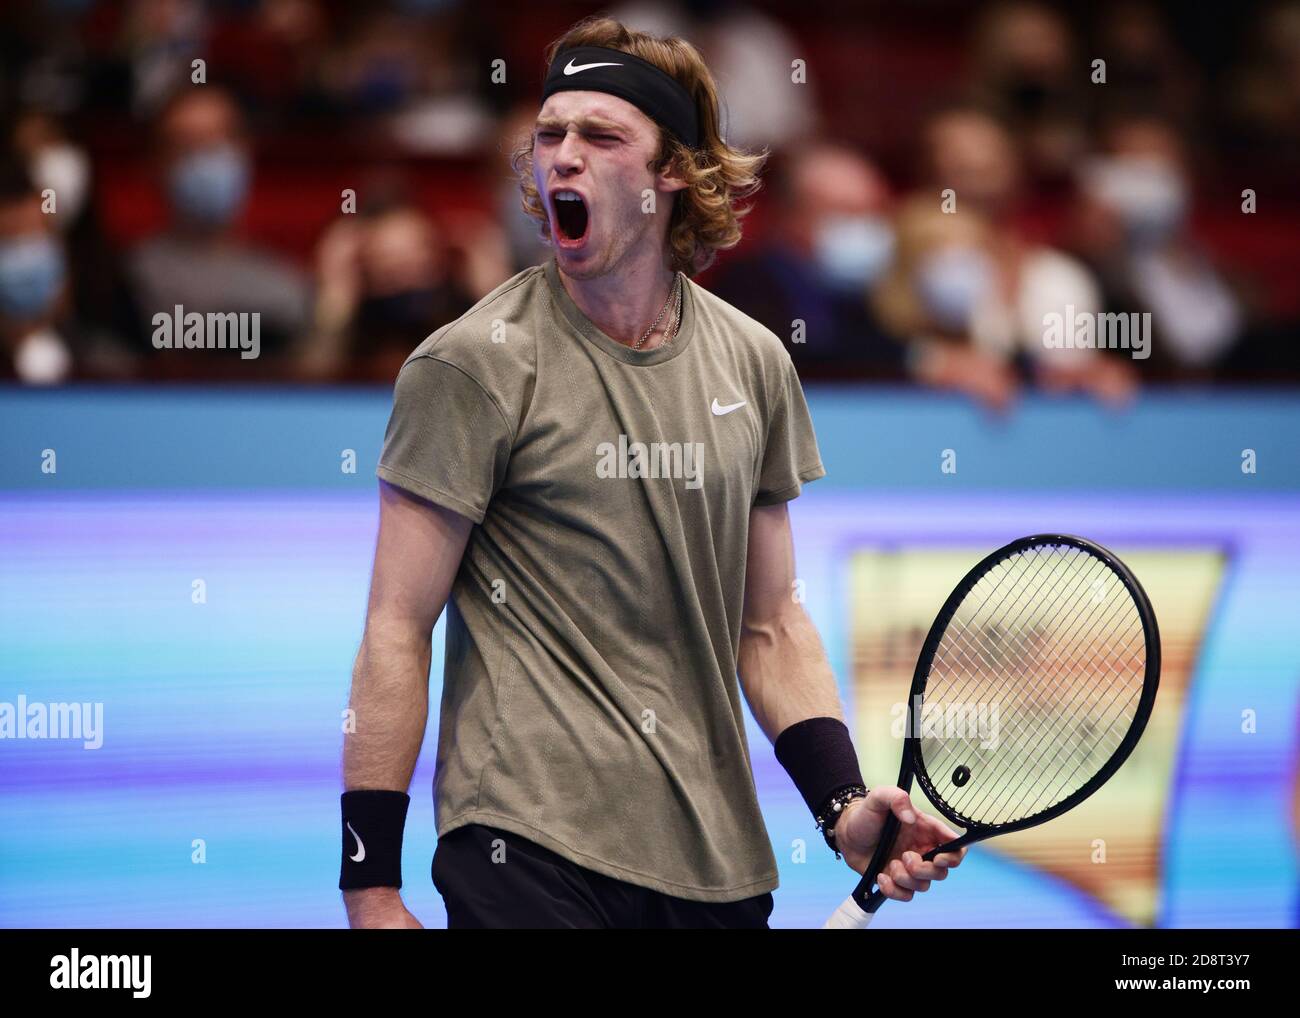 Tennis - ATP 500 - Erste Bank Open - Wiener Stadthalle, Vienna, Austria -  November 1, 2020 Russia's Andrey Rublev celebrates winning the final  against Italy's Lorenzo Sonego REUTERS/Lisi Niesner Stock Photo - Alamy